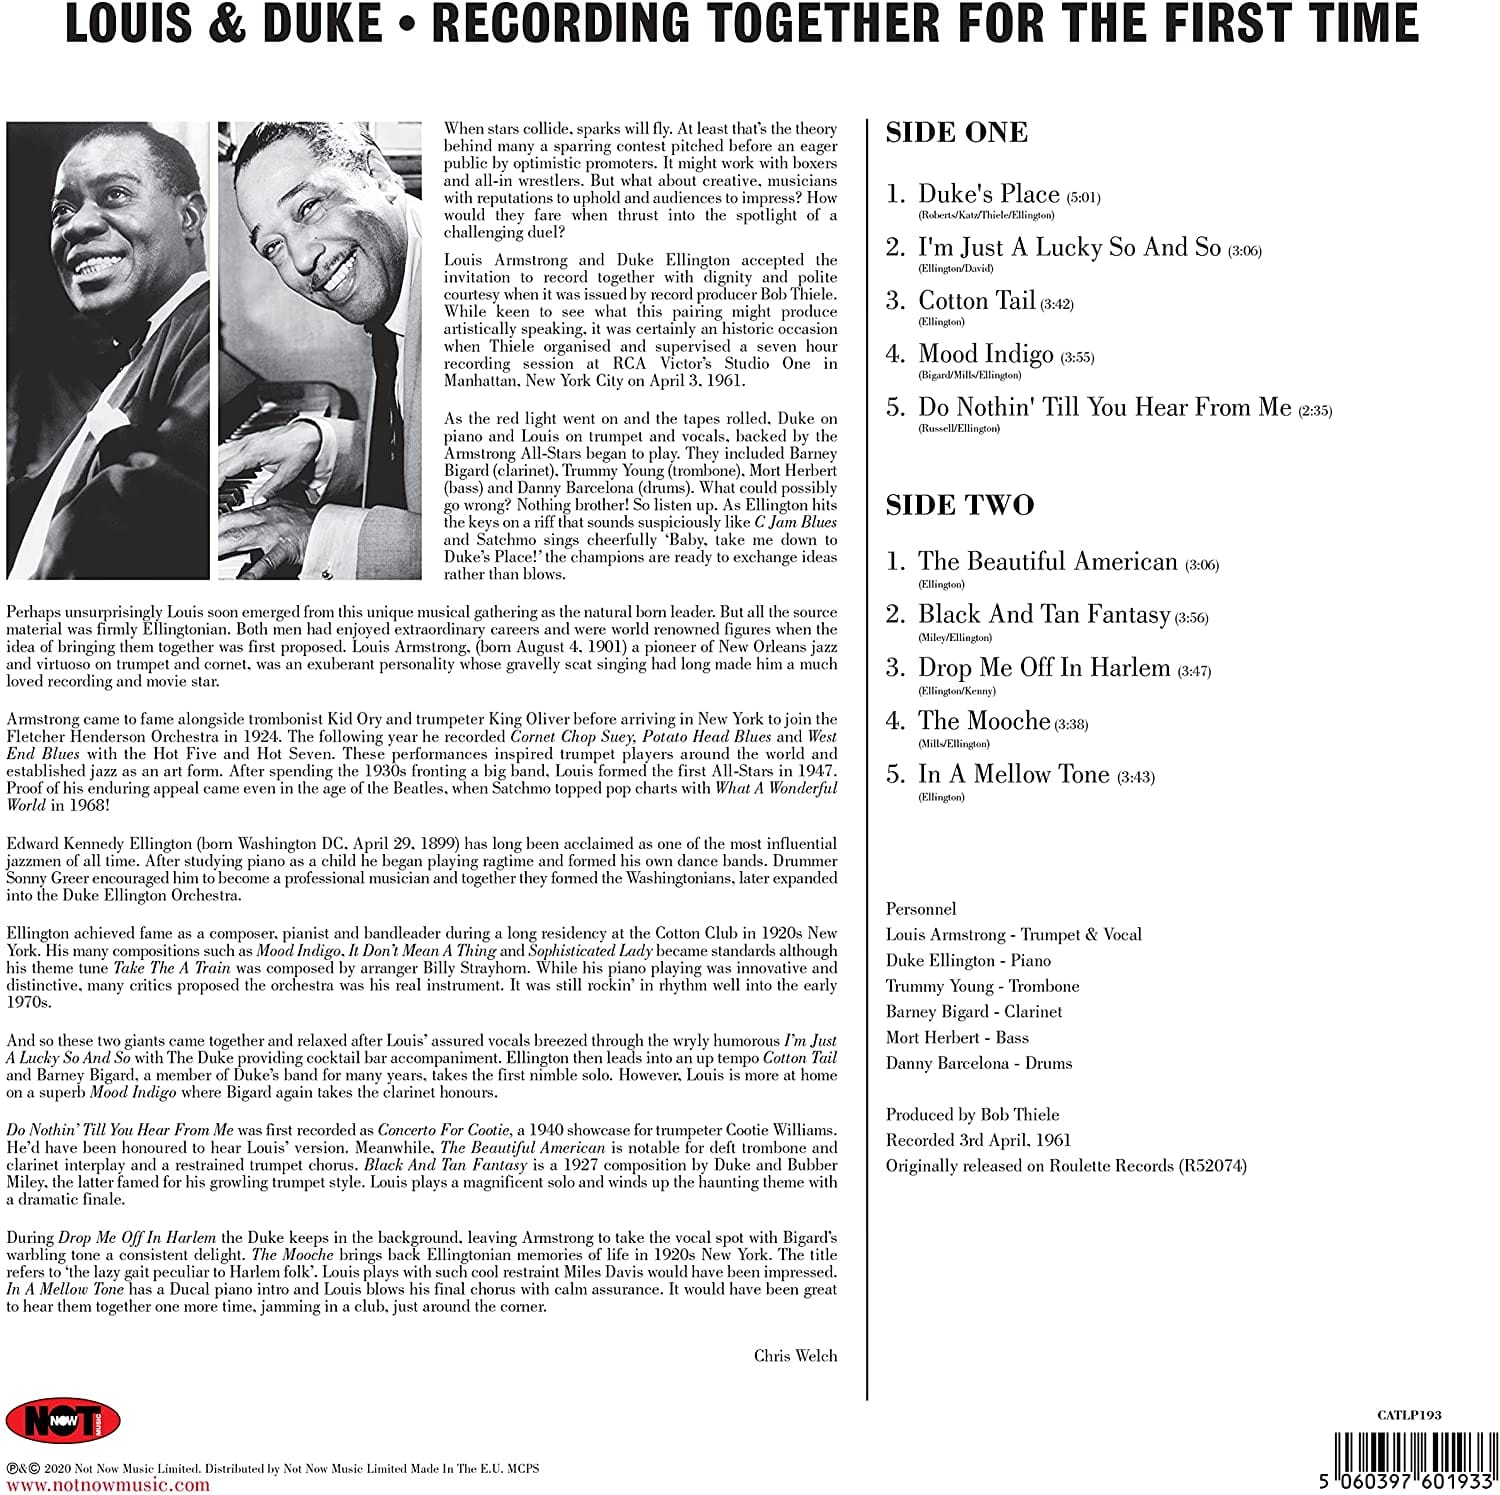 RECORDING TOGETHER FOR THE FIRST TIME - LOUIS ARMSTRONG & DUKE ELLINGTON [VINYL]